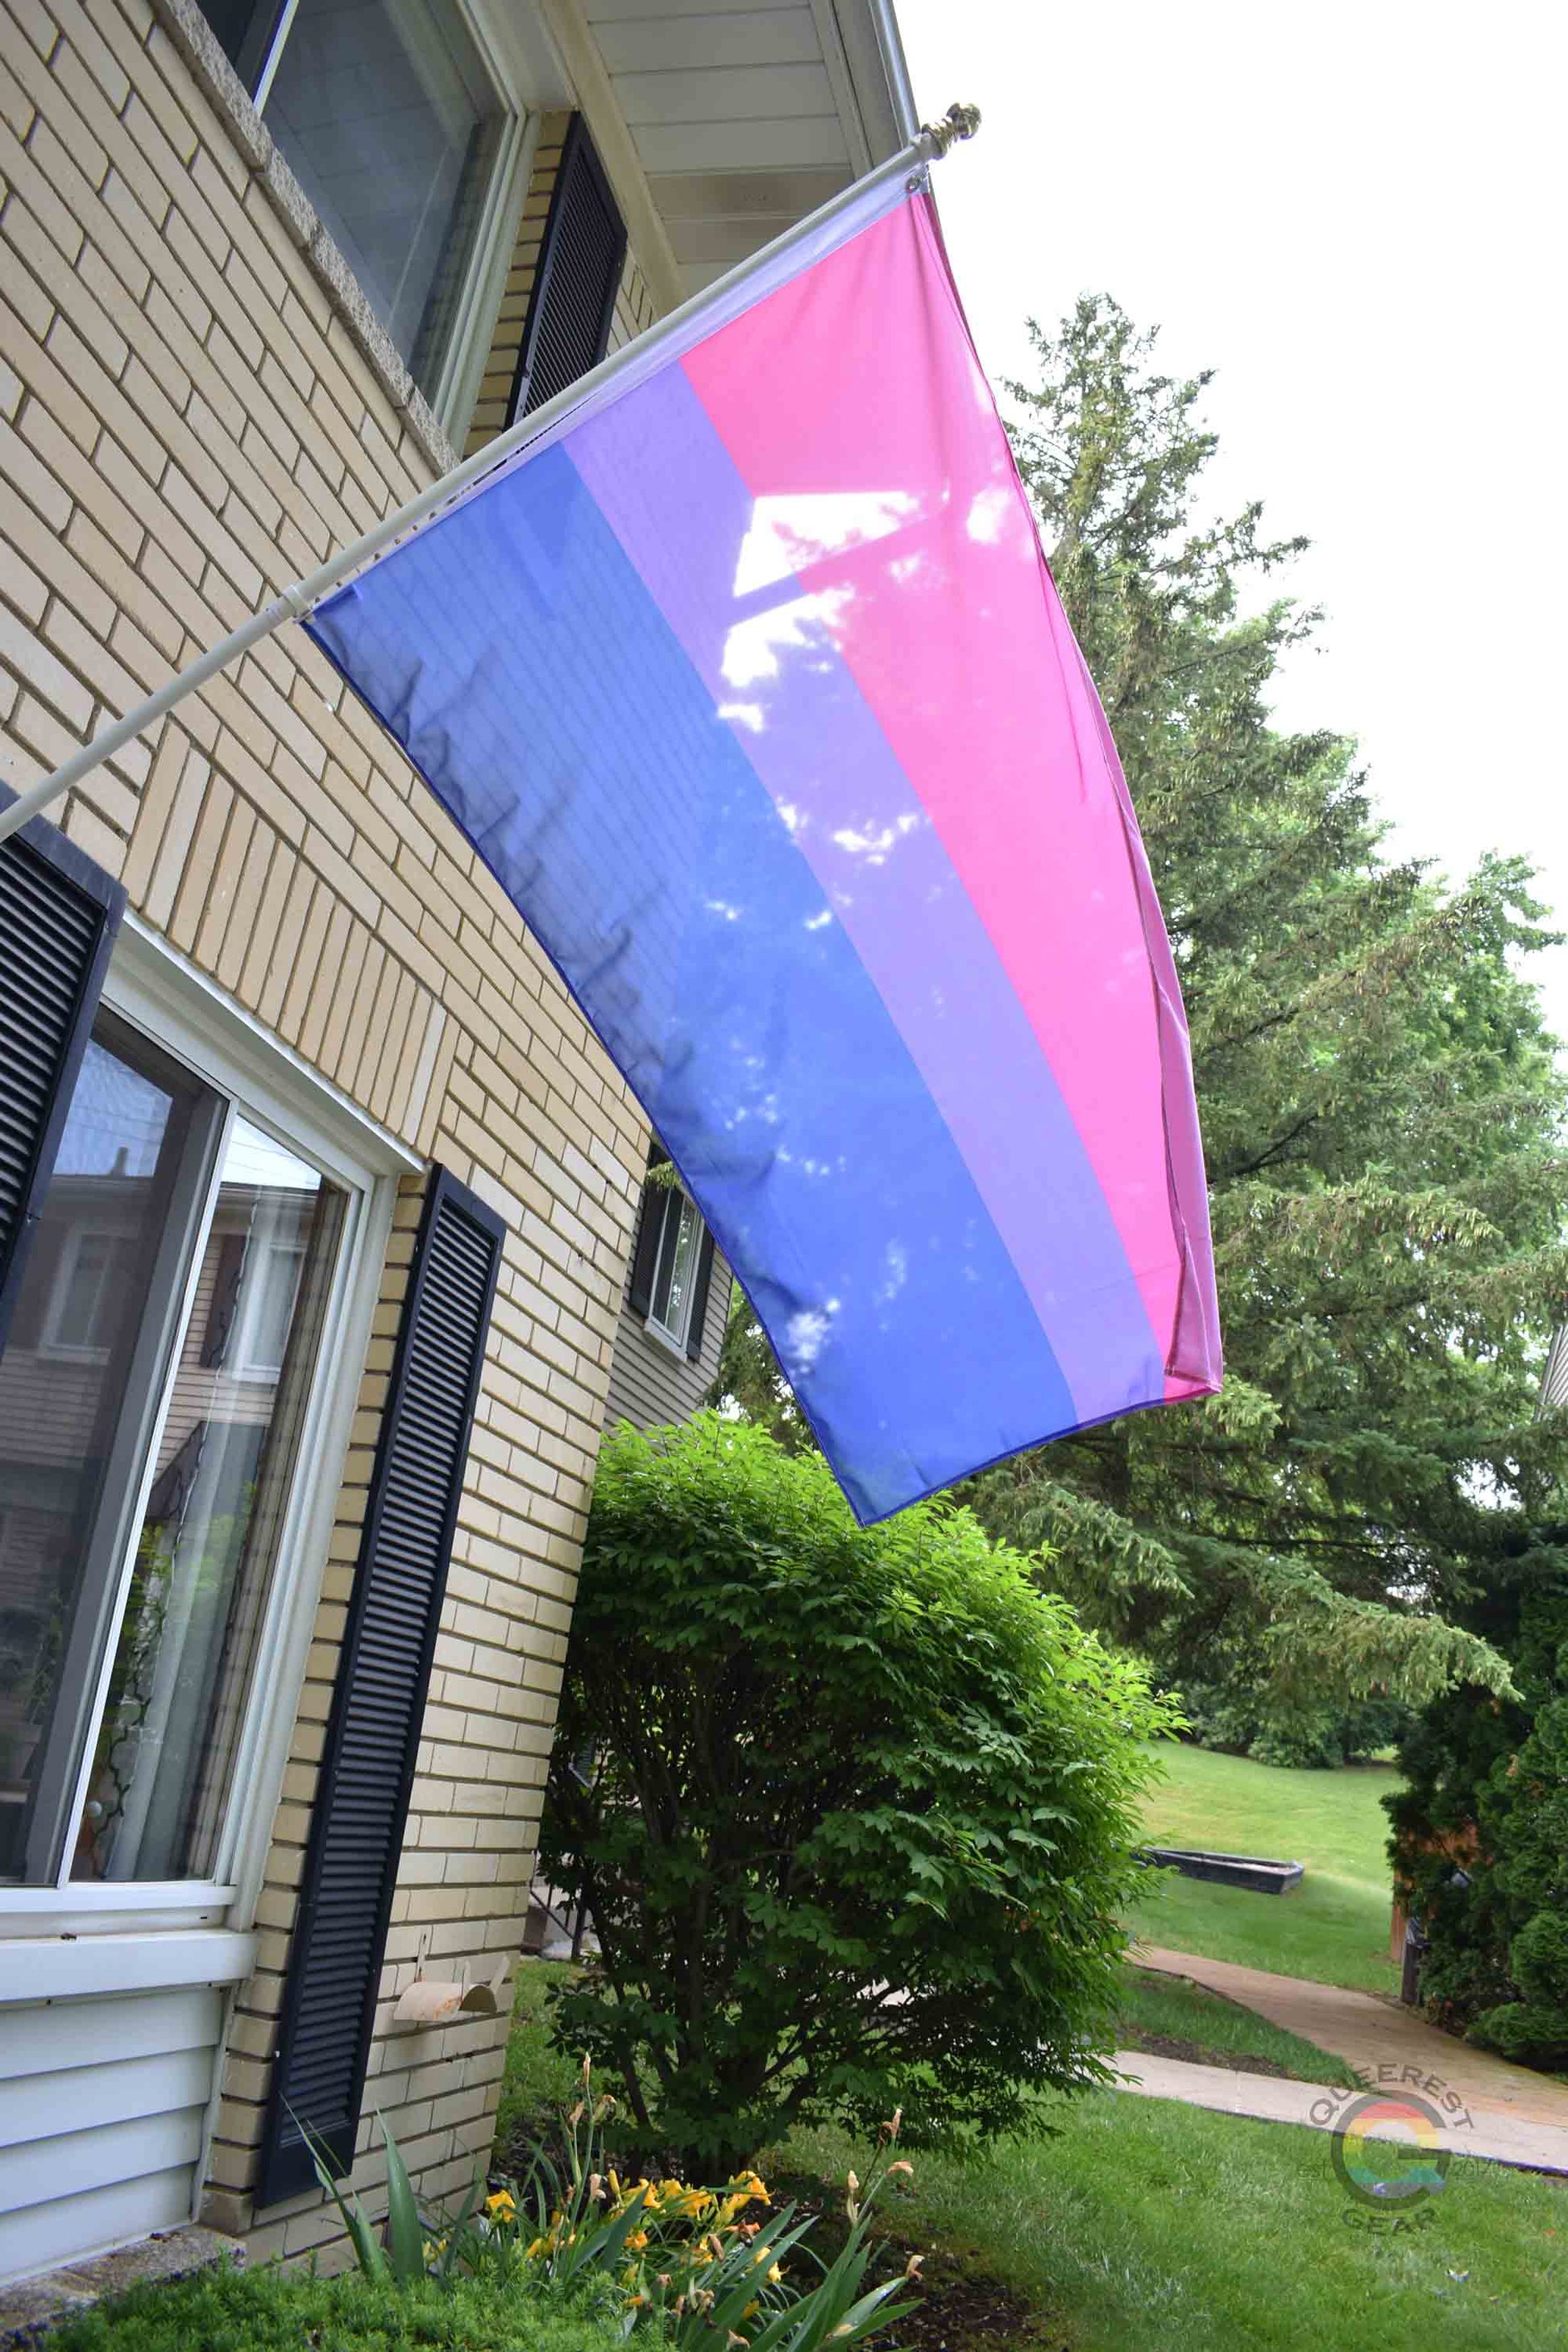 3’x5’ bisexual pride flag hanging from a flagpole on the outside of a light brick house with dark shutters